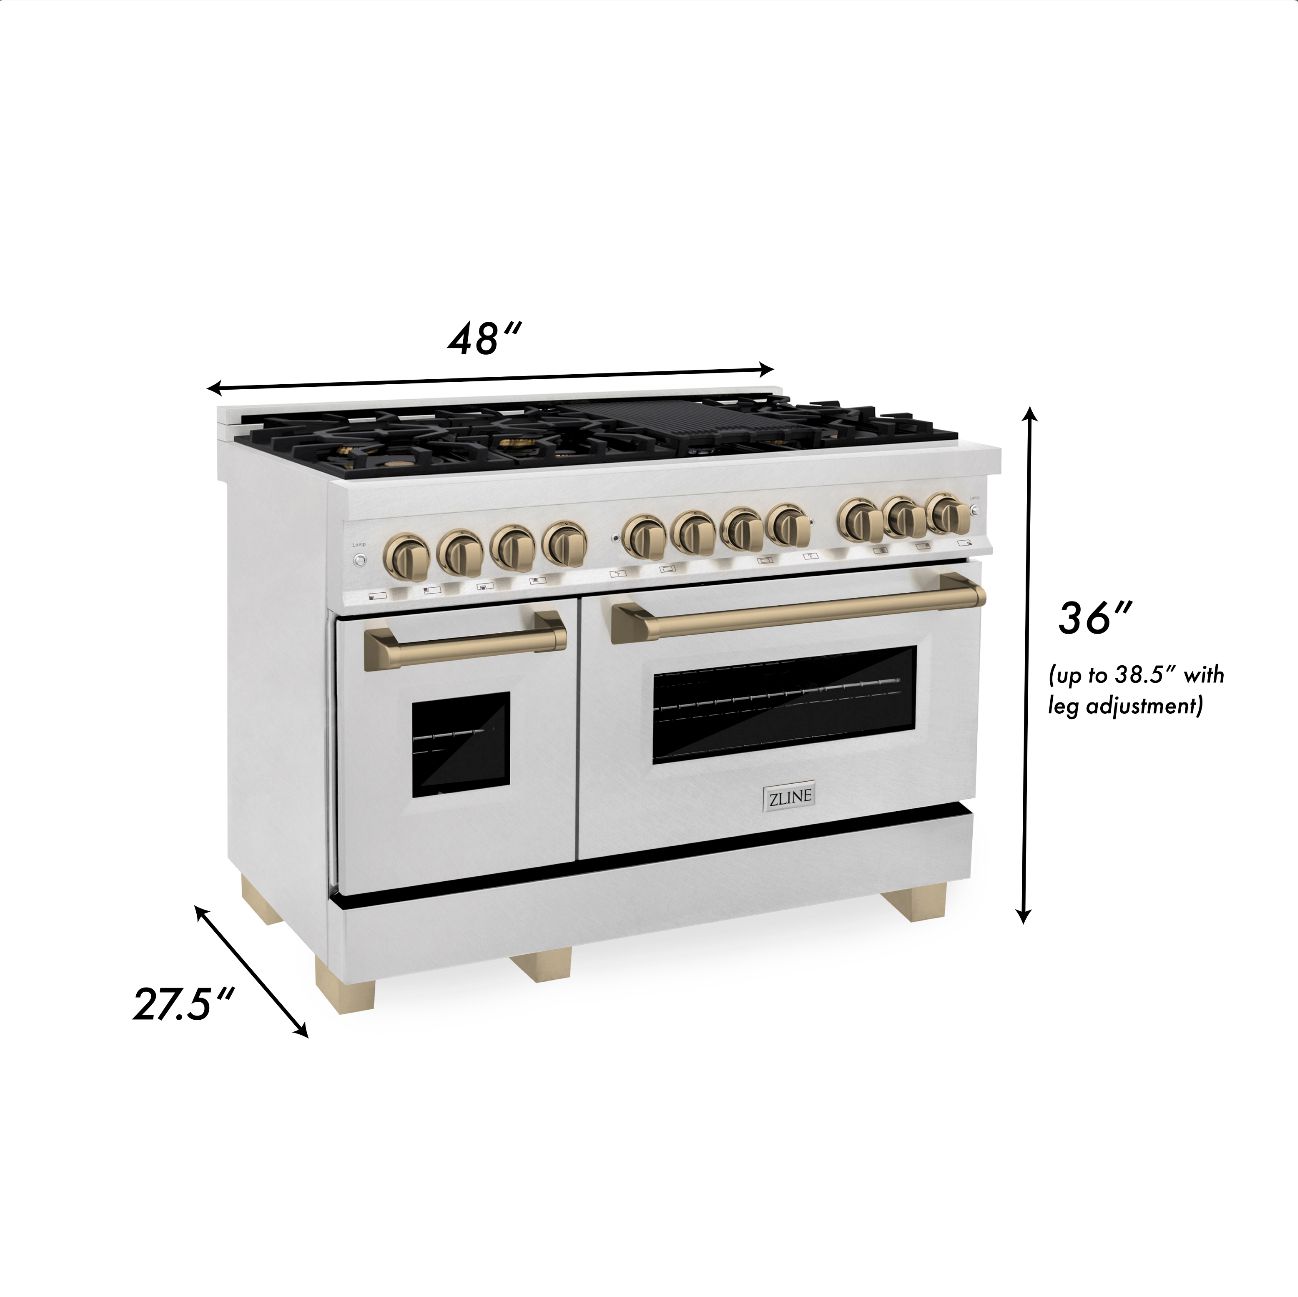 ZLINE Autograph Edition 48" 6.0 cu. ft. Dual Fuel Range with Gas Stove and Electric Oven in DuraSnow Stainless Steel with Champagne Bronze Accents (RASZ-SN-48-CB)